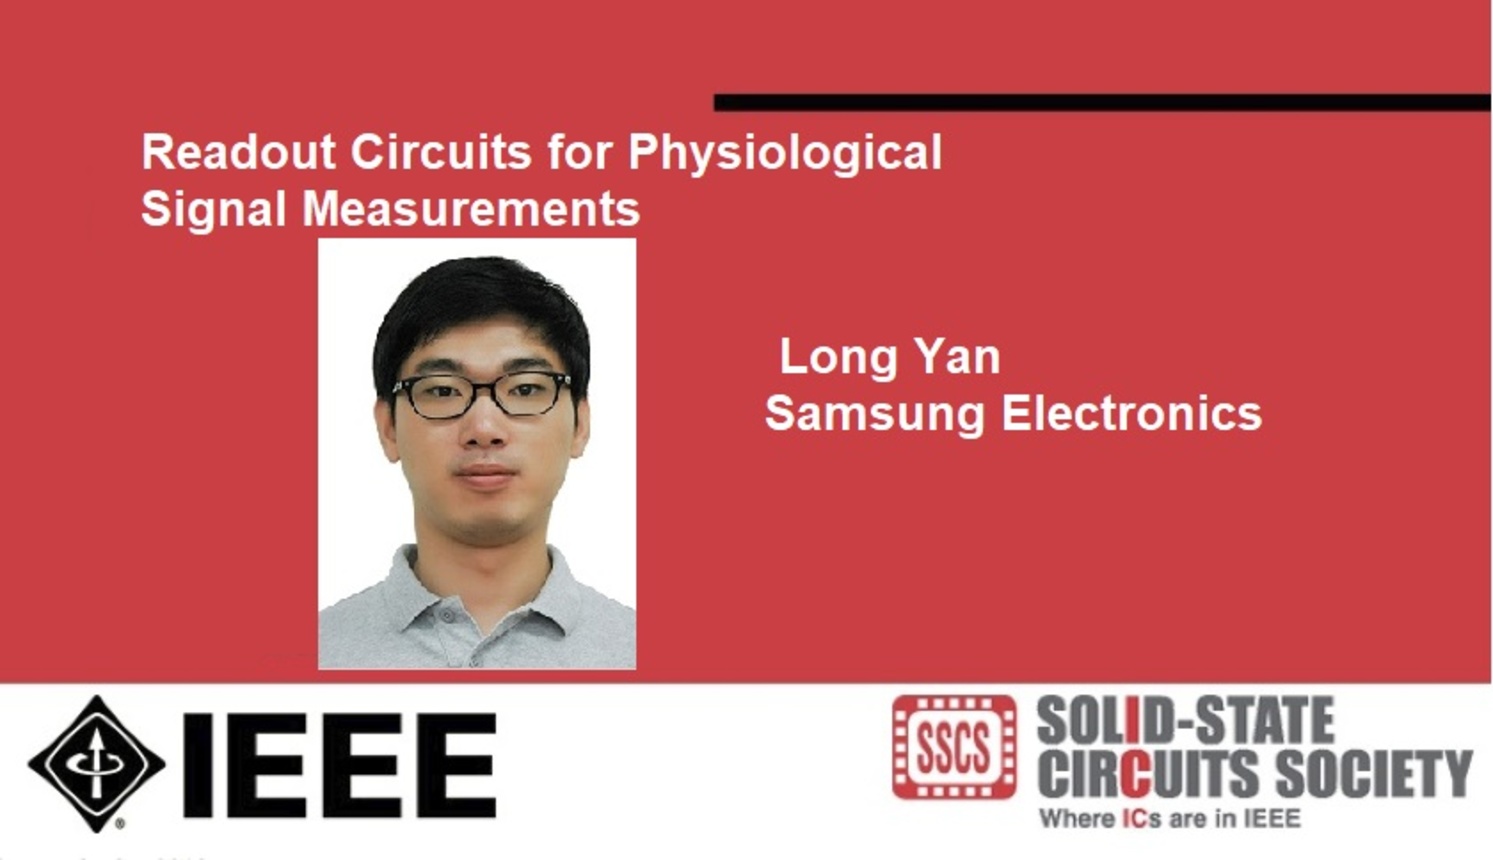 Readout Circuits for Physiological Signal Measurements Video